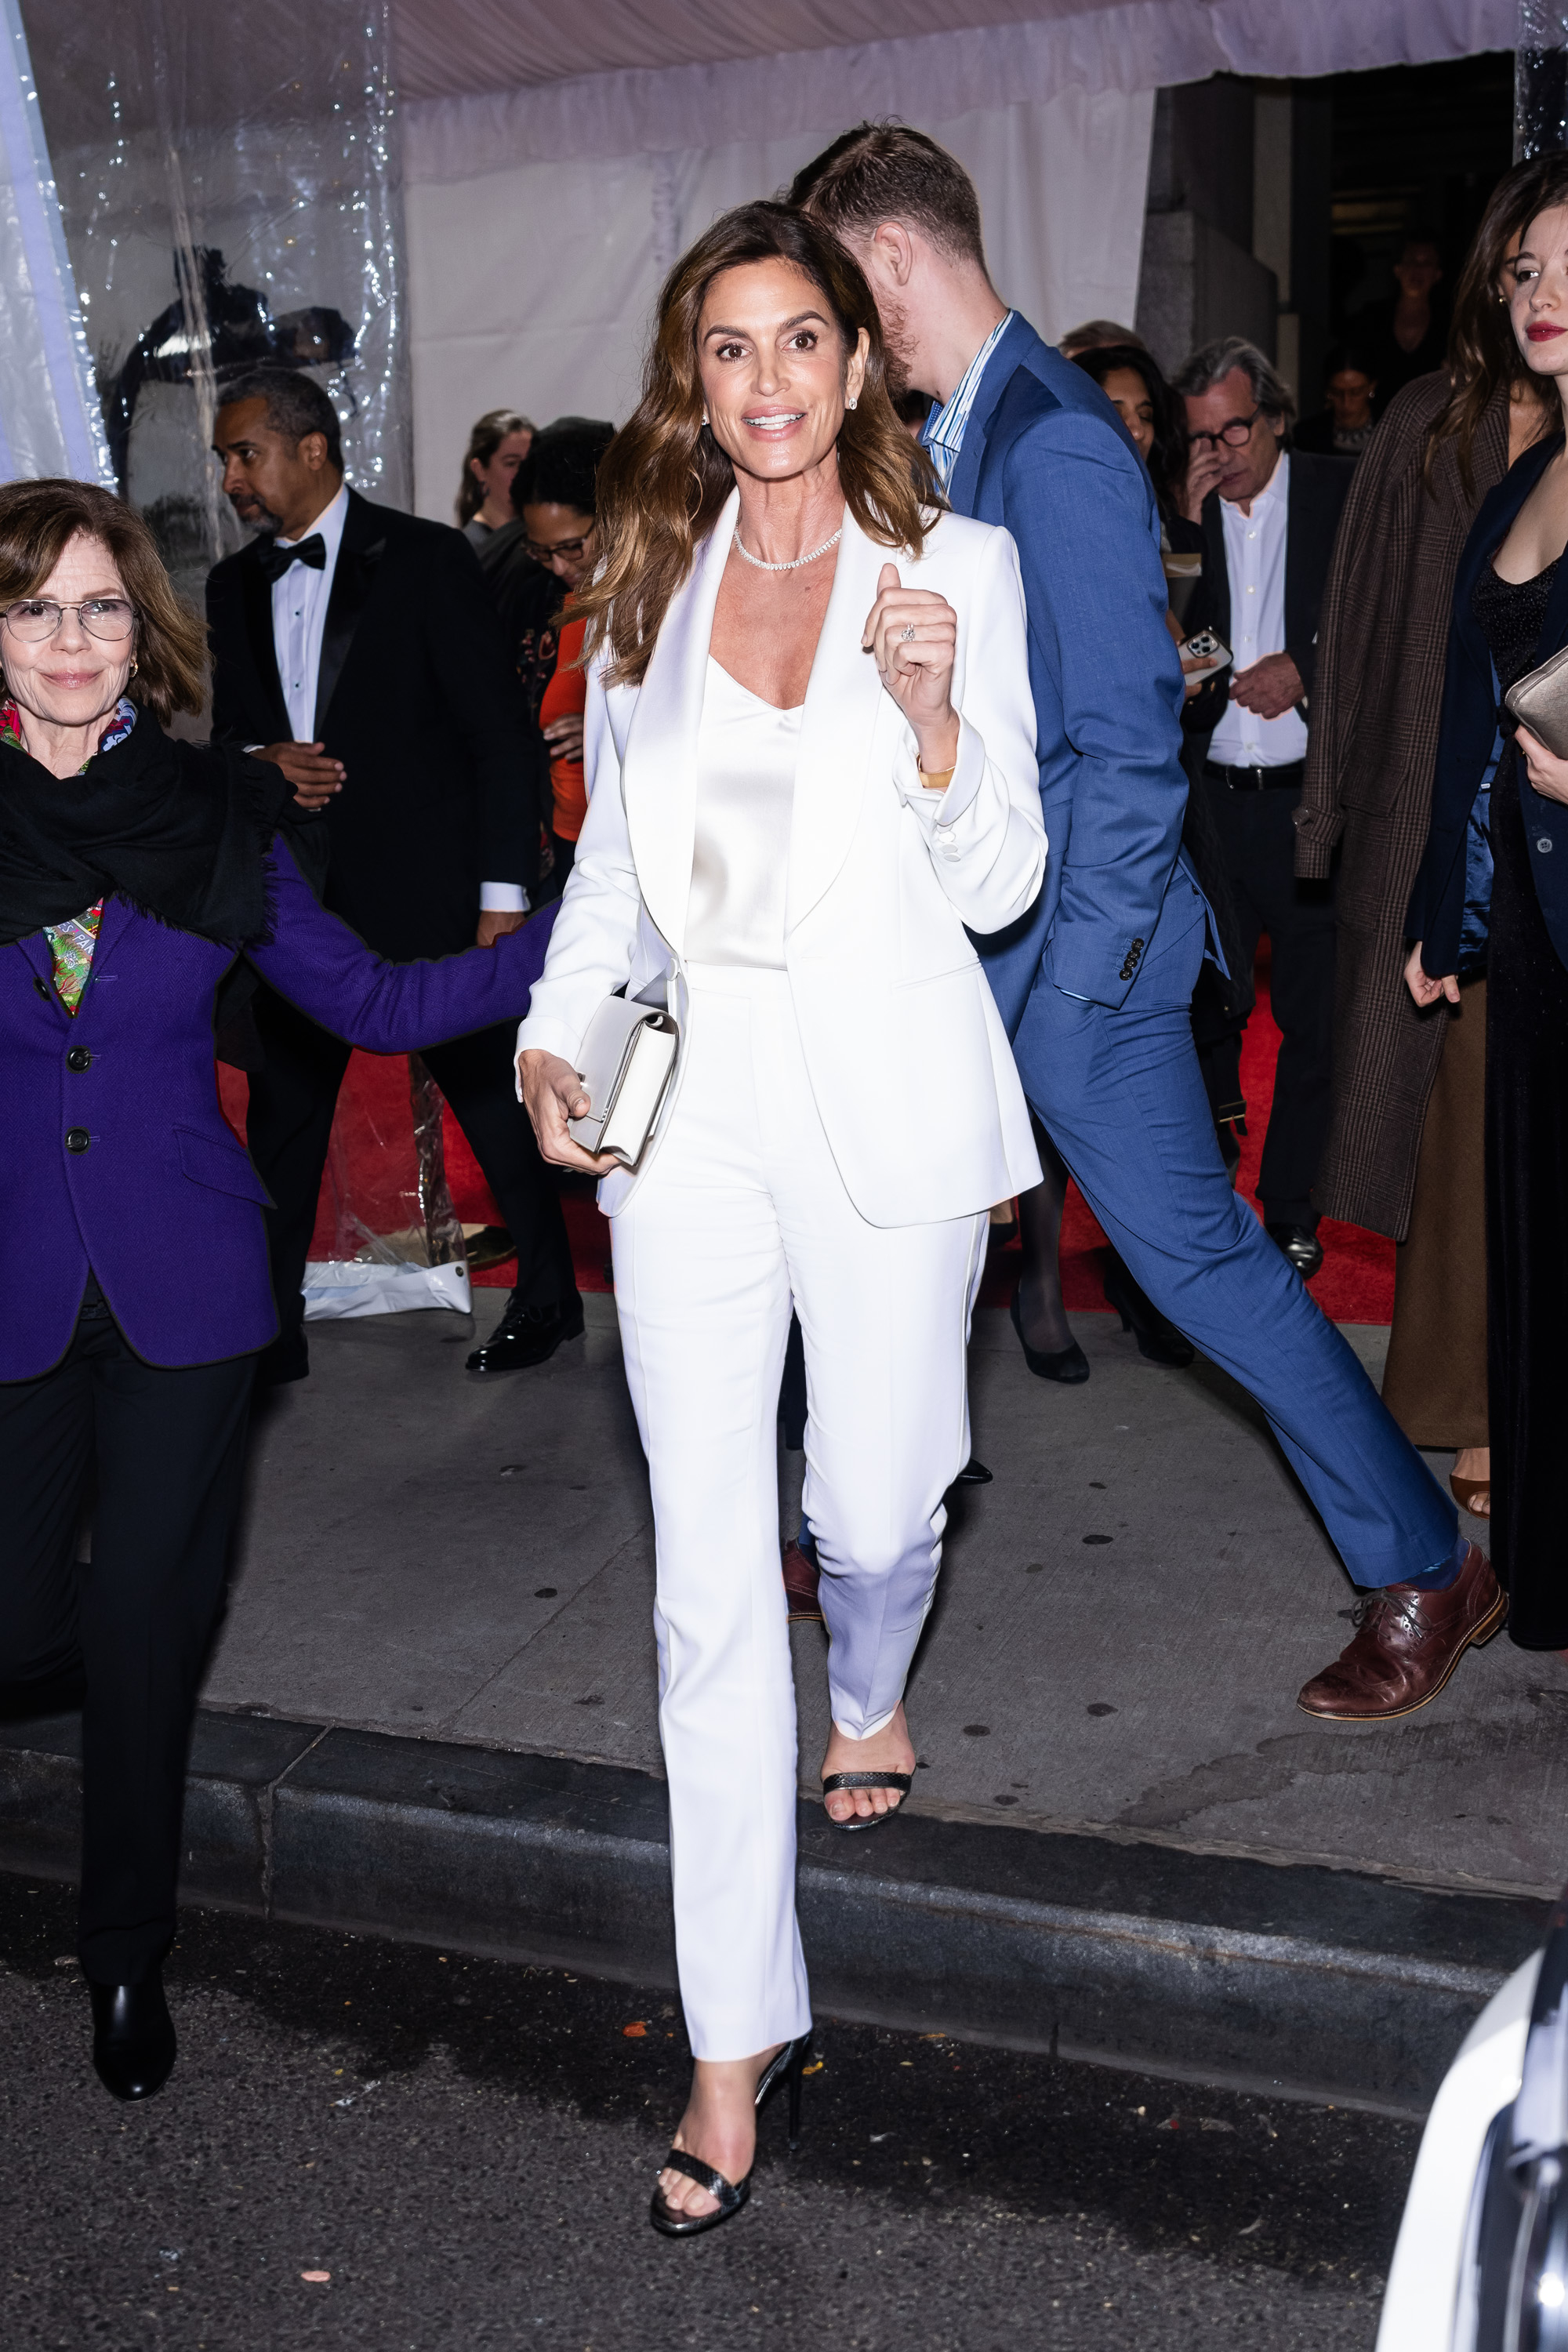 Woman in white suit with lapels and holding a clutch, walking at an event